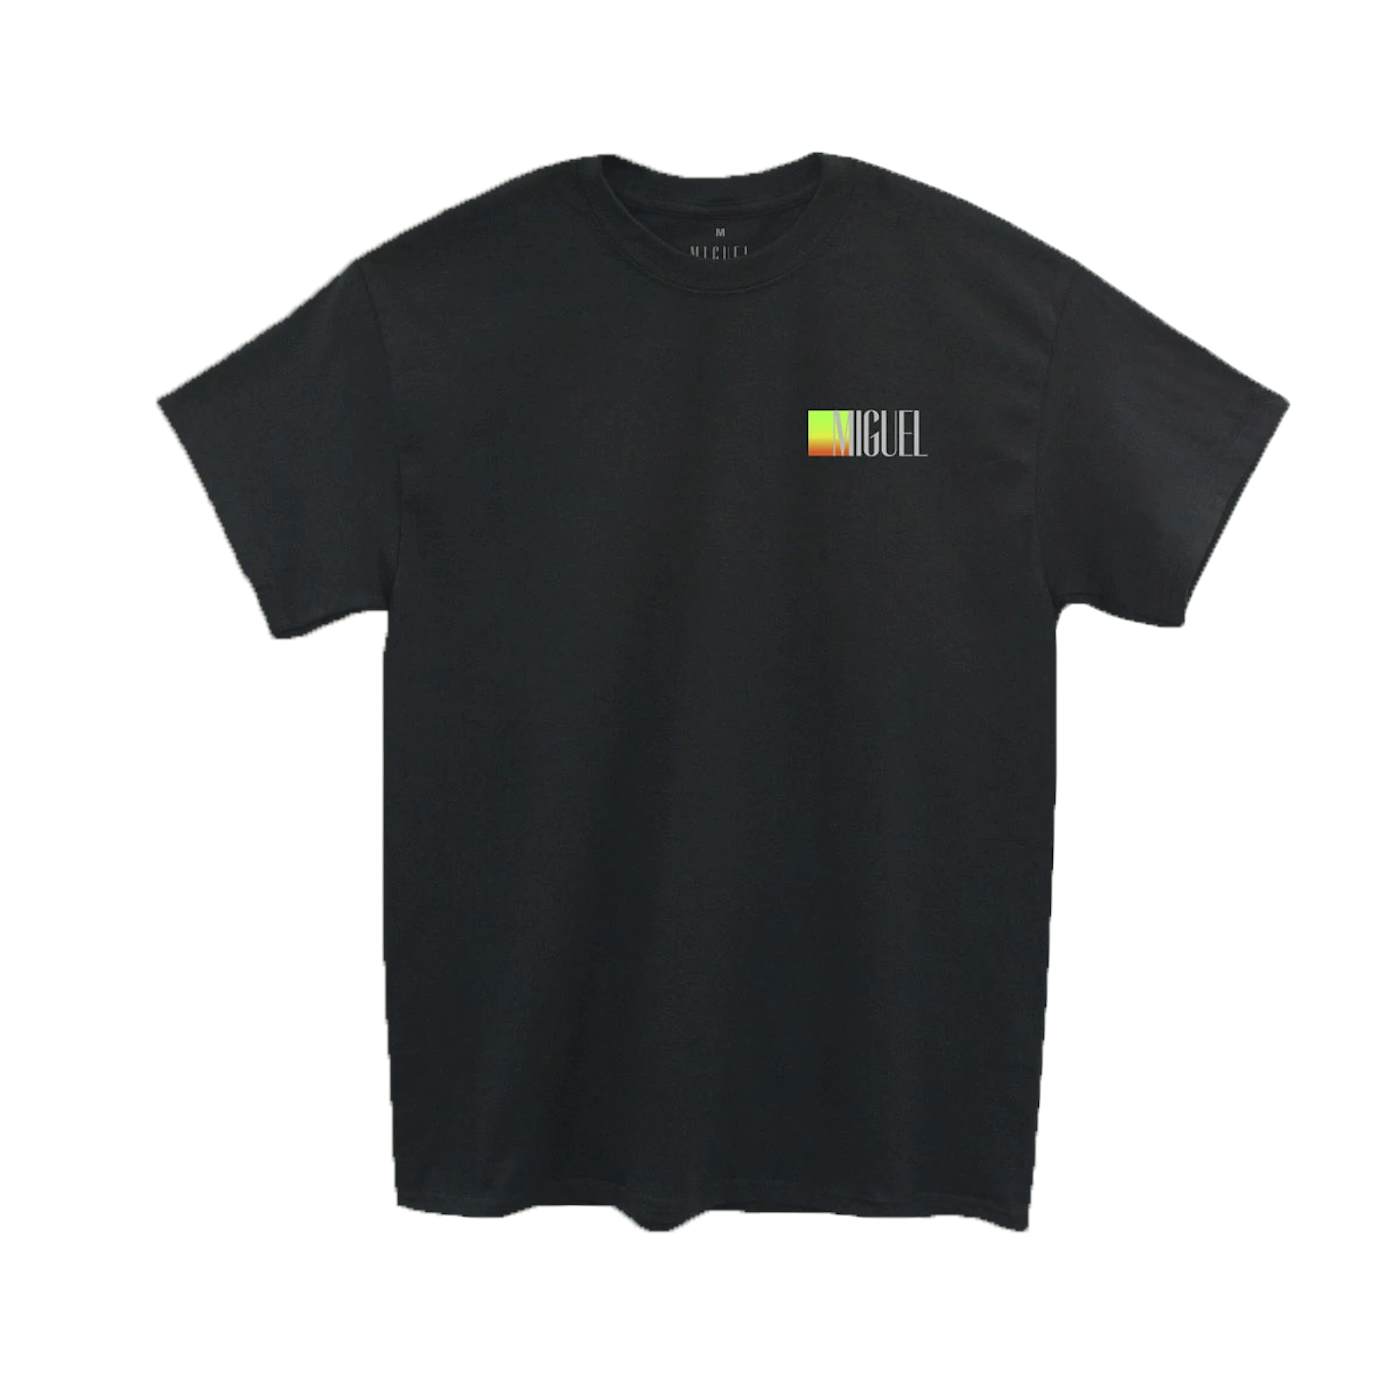 Miguel Ascension Iridescent Tee